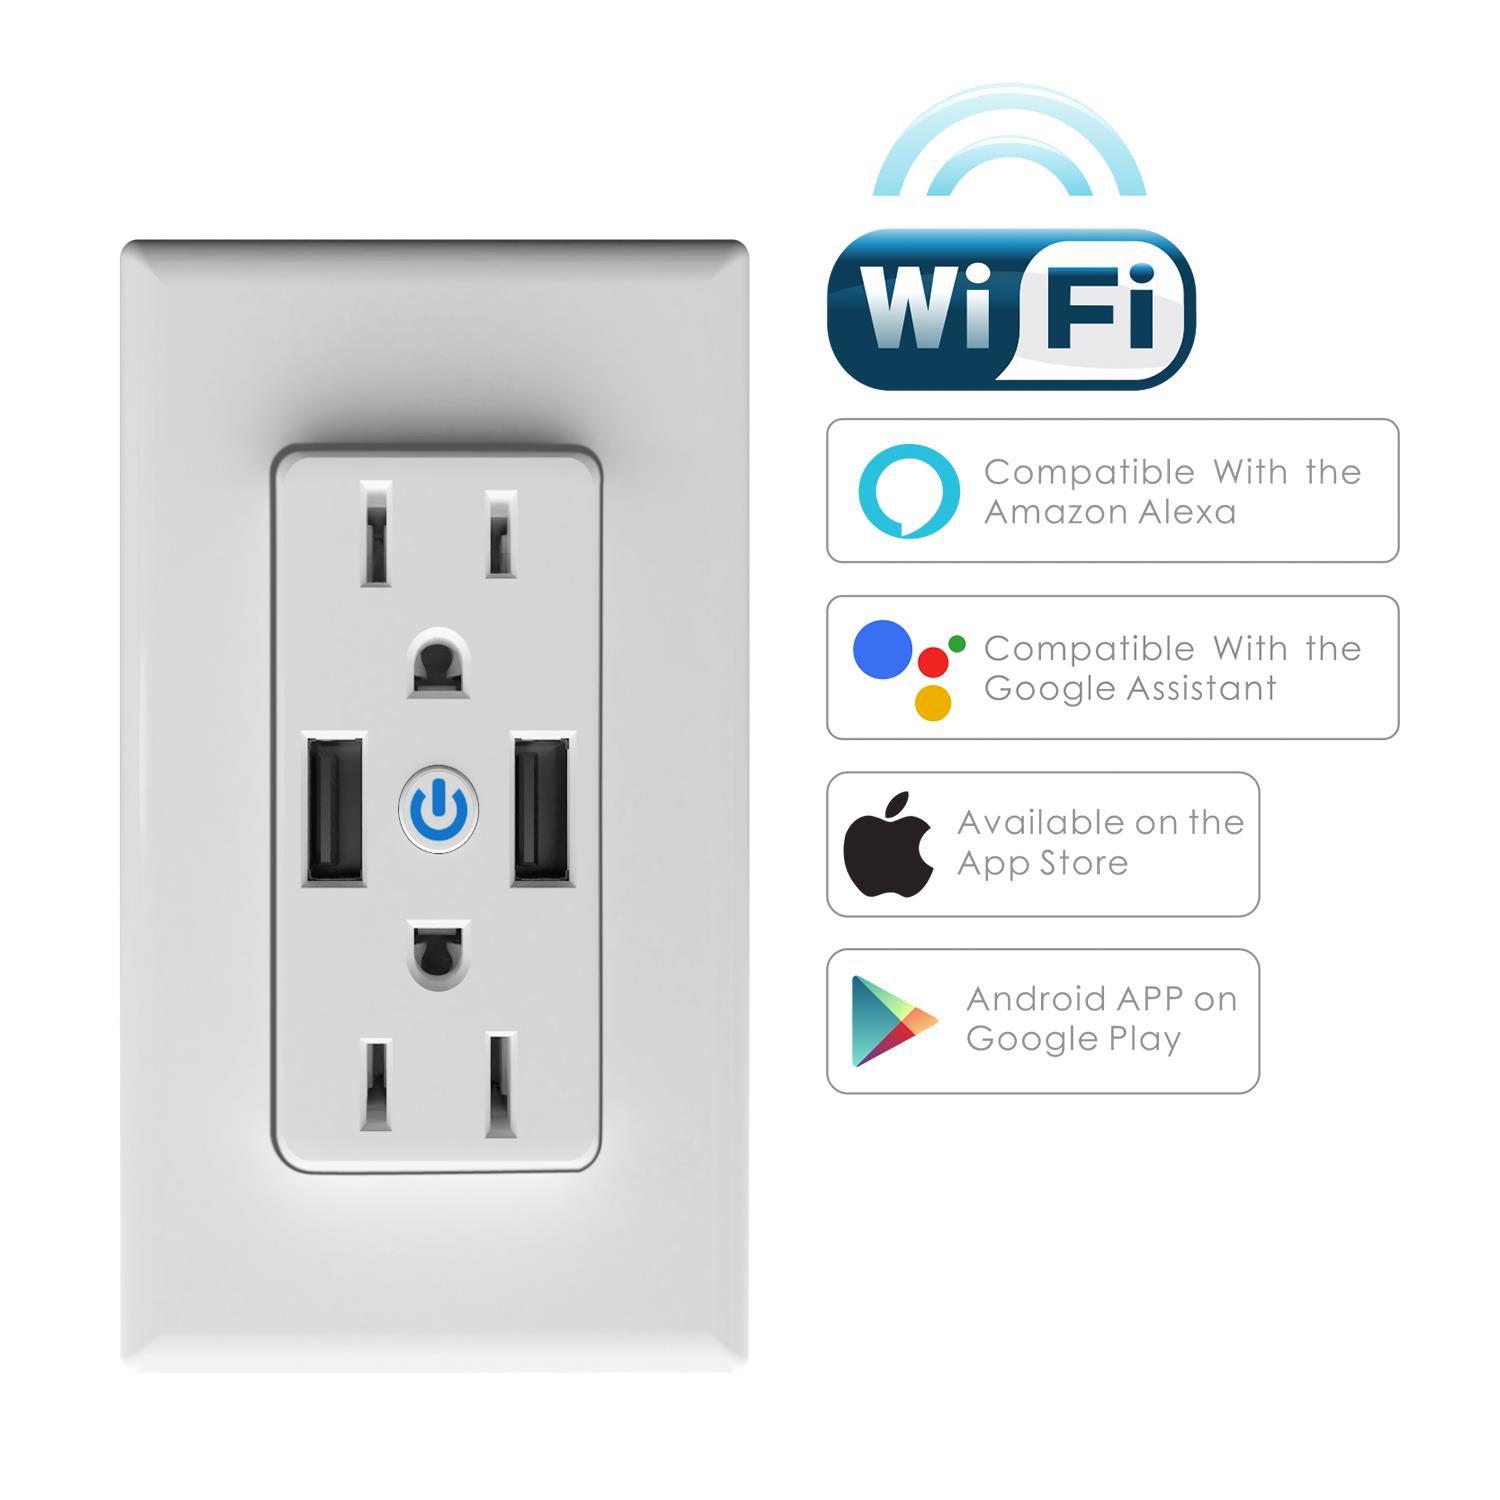 Bakeey-T16-WIFI-Remote-Control-Smart-Home-Wall-Socket-Power-Switch-For-Amazon-Alexa-Google-Assistant-1354113